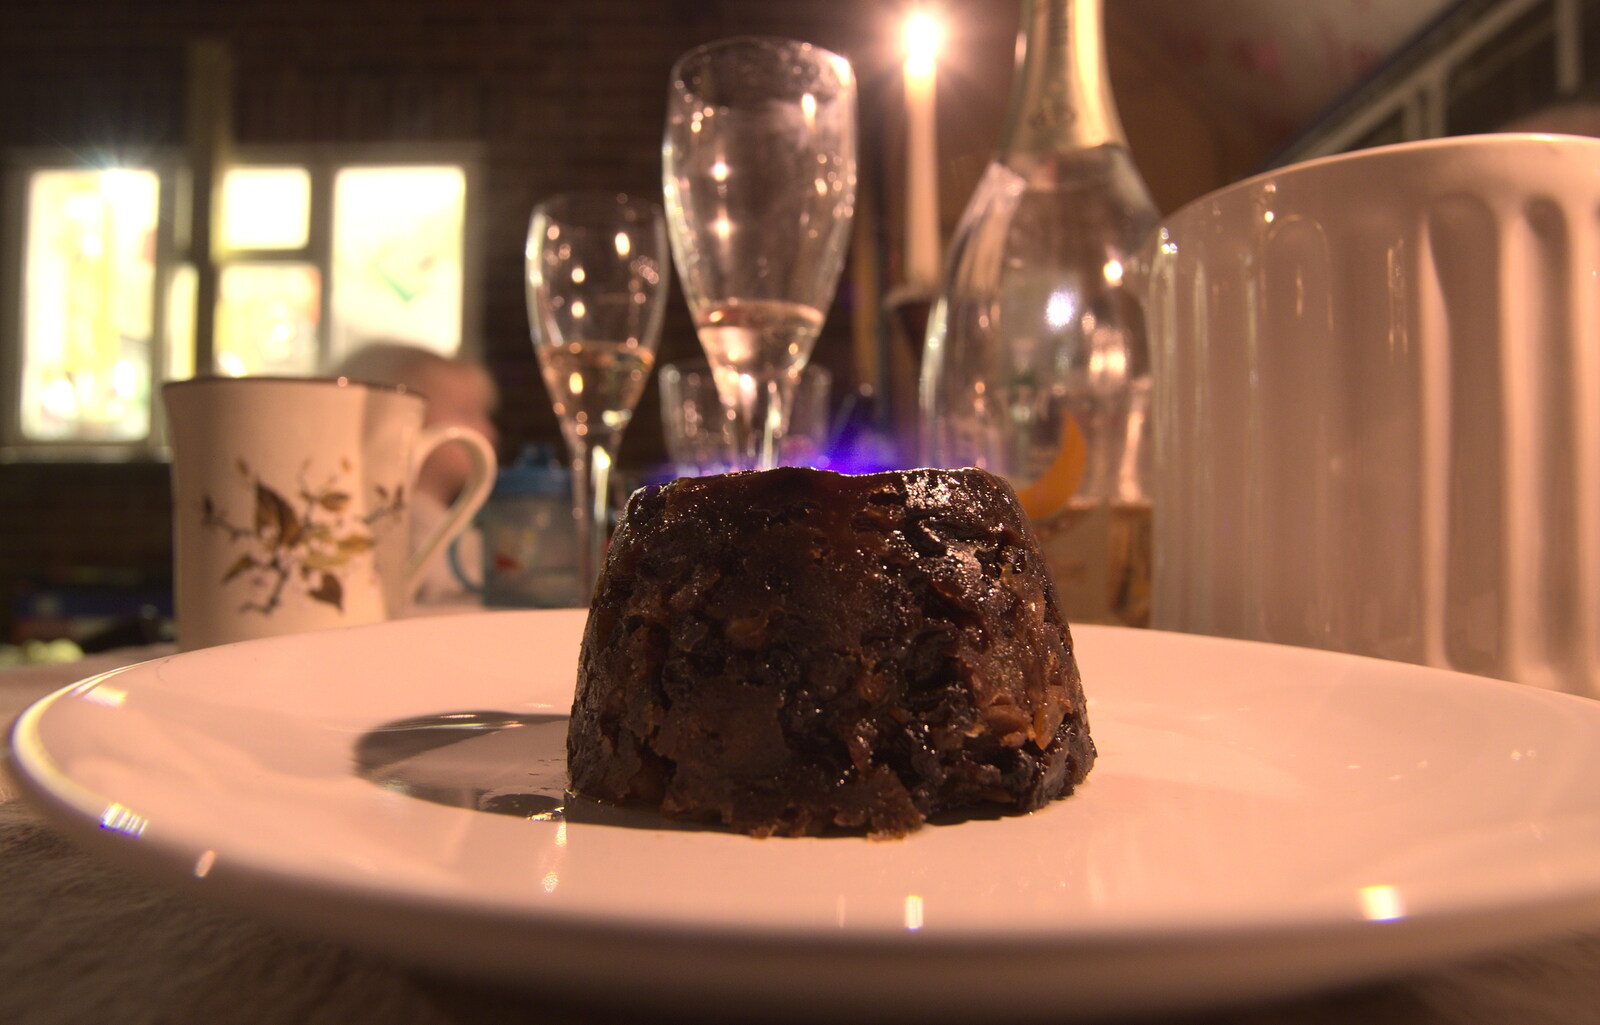 The Christmas pudding is dimly alight from A Boxing Day Walk, Thornham Estate, Suffolk - 26th December 2013